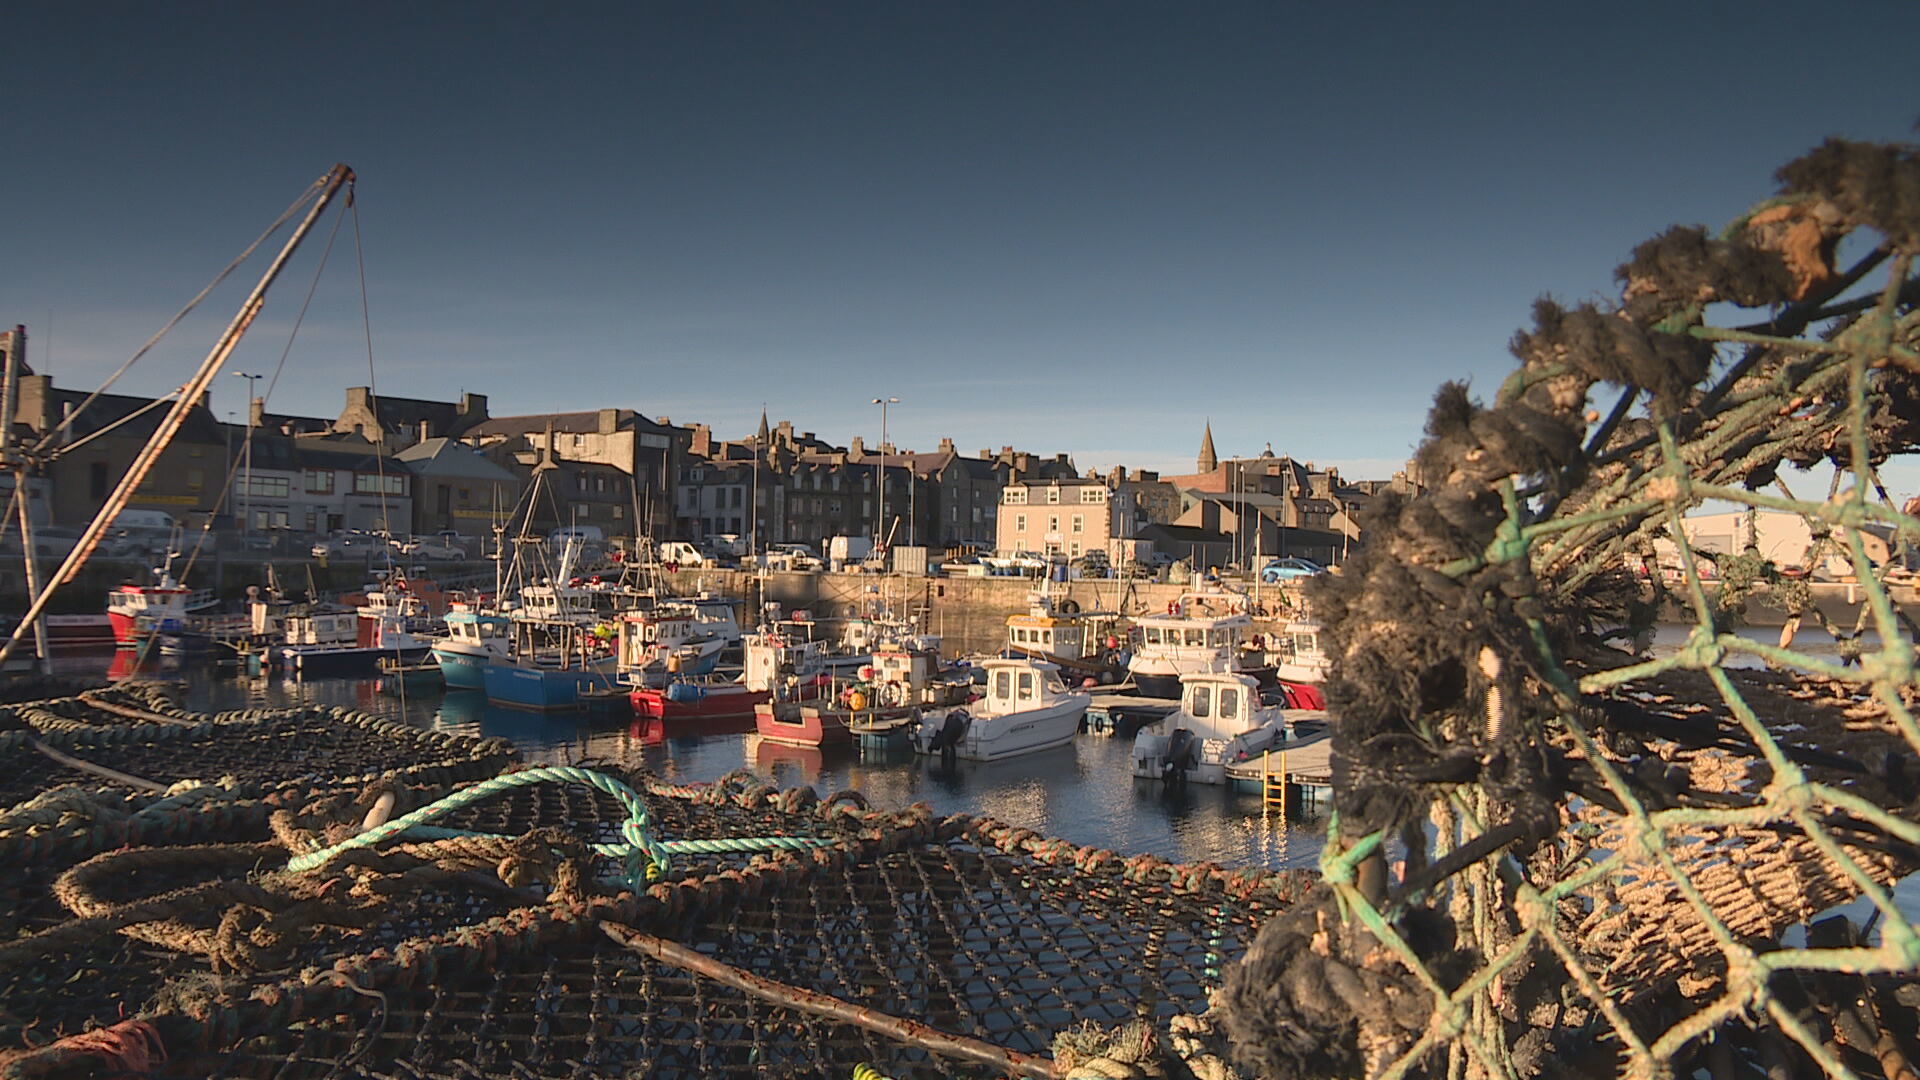 The Scottish Government says the fishing ban will help conserve ecosystems in Scotland's seas.